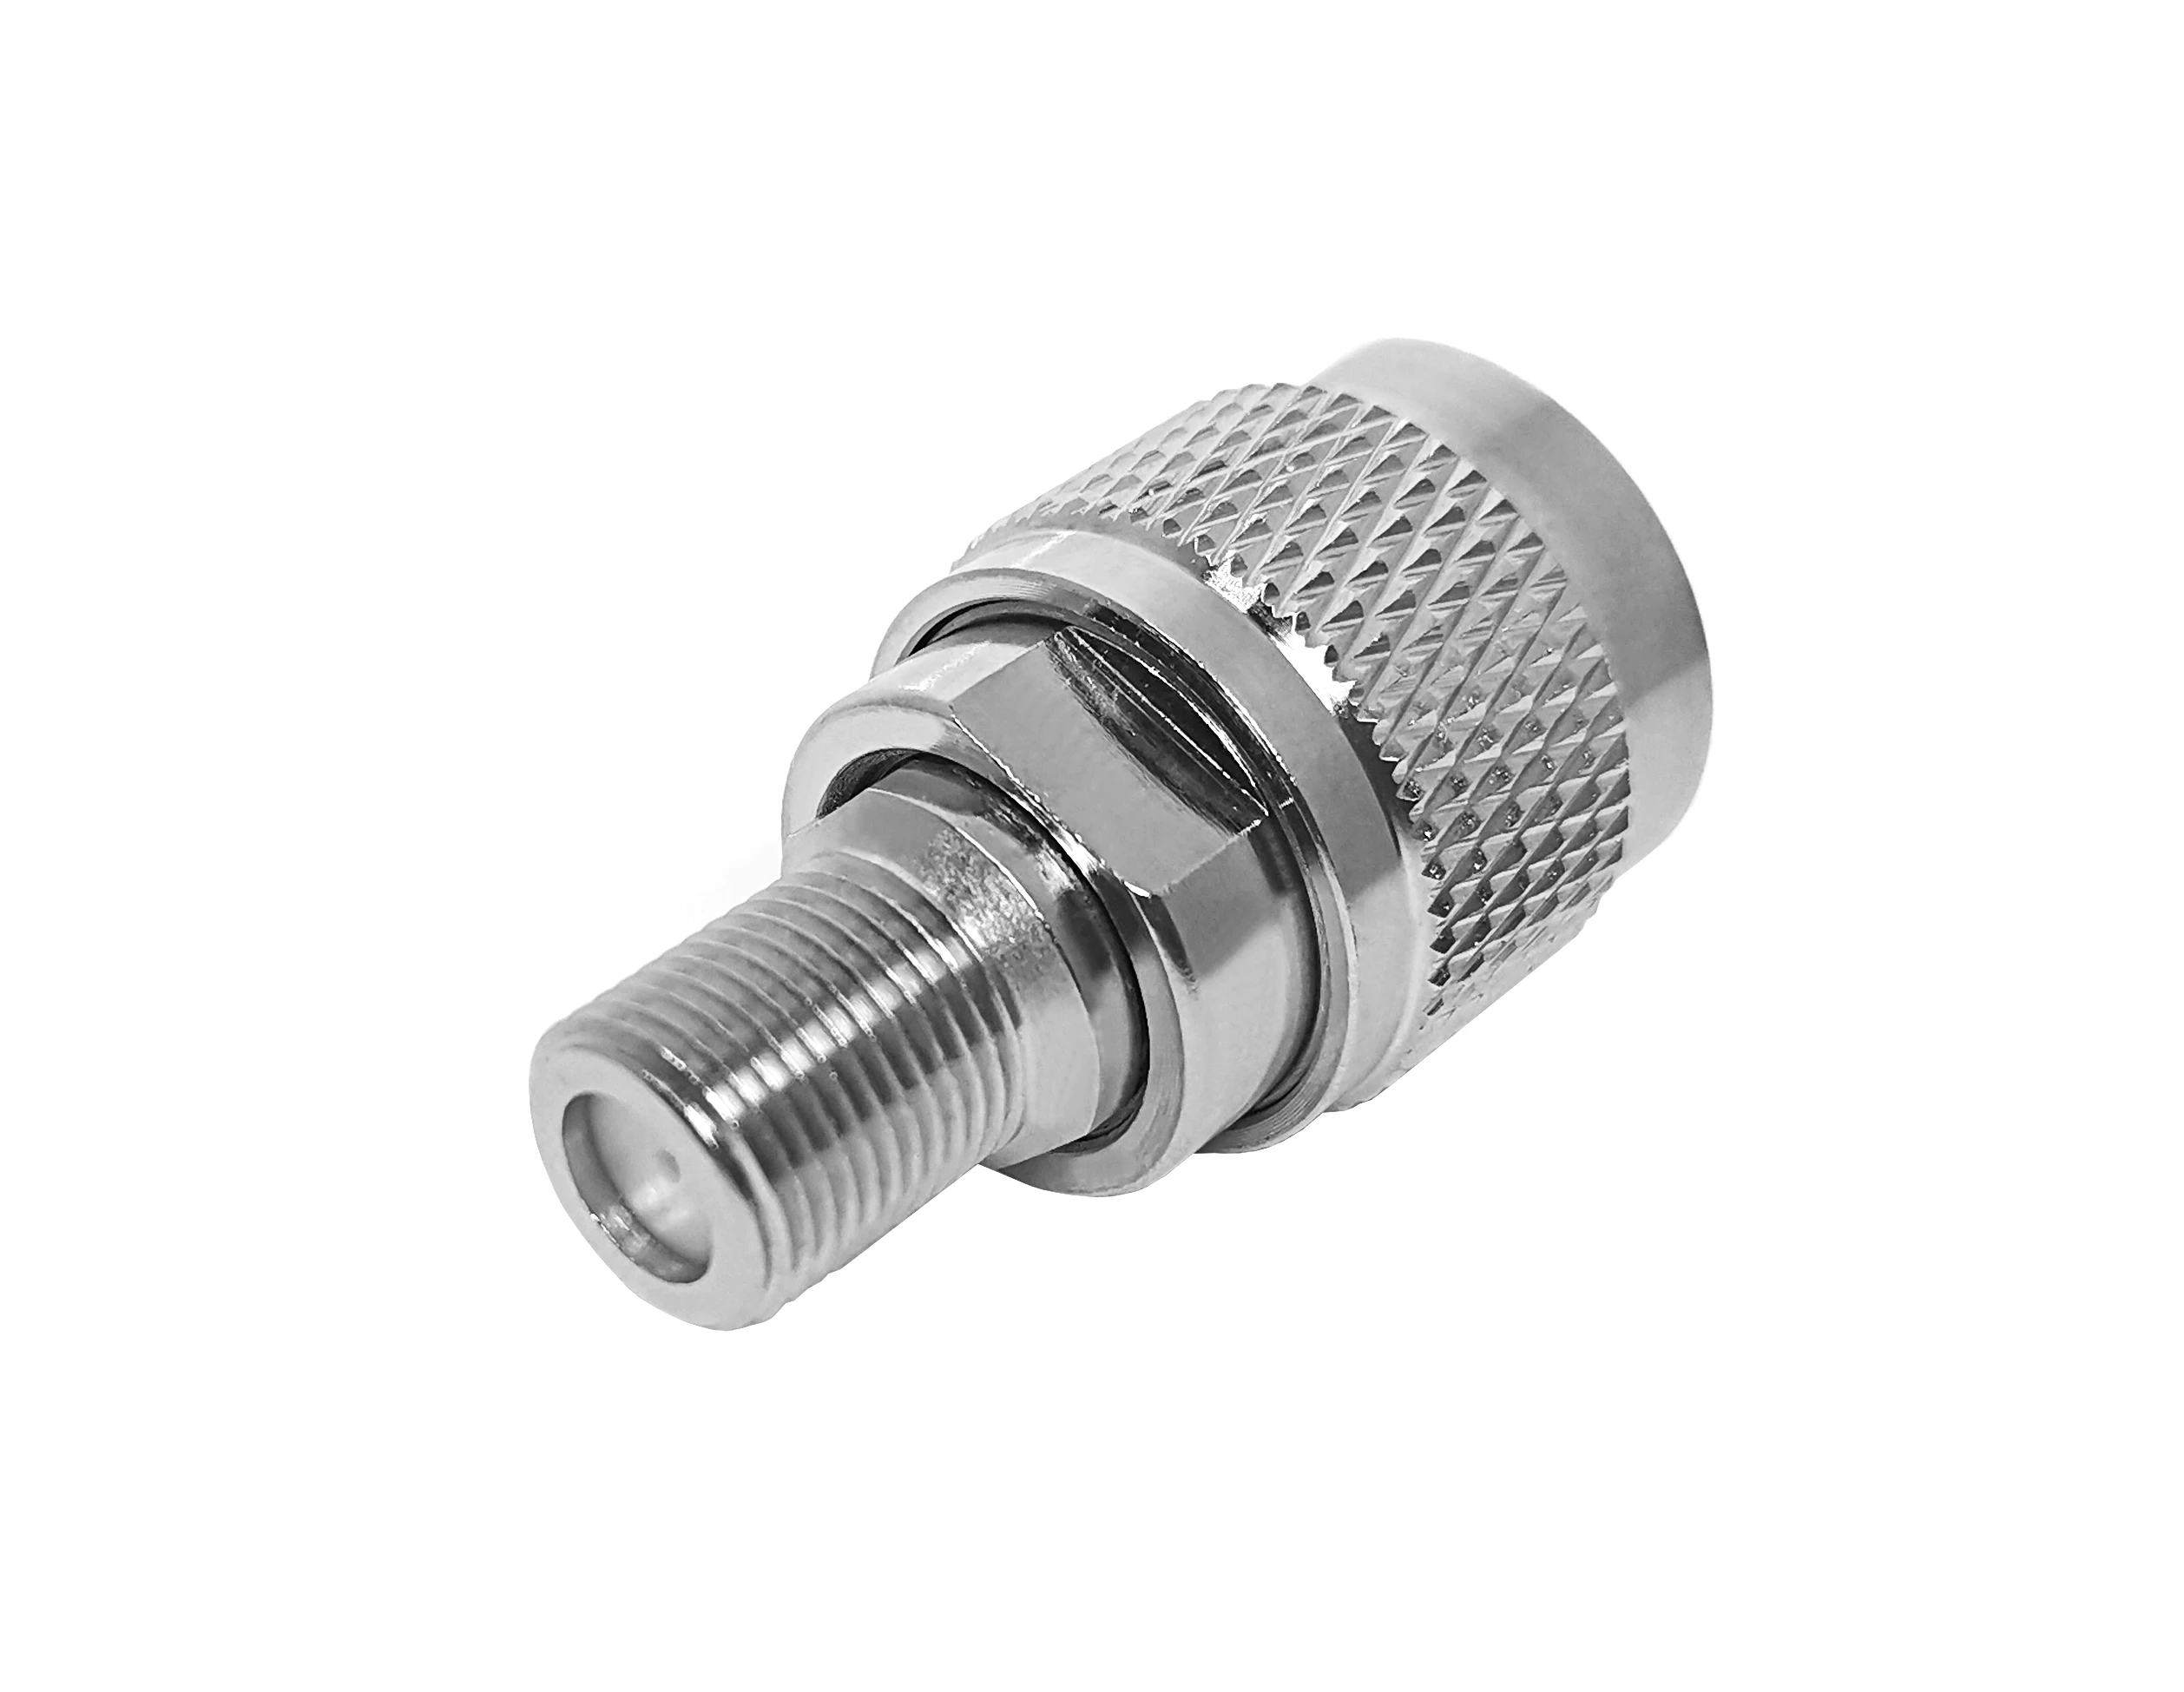 RFVOTON Adaptor n male plug to f female jack brass connector straight rf coaxial adapter details